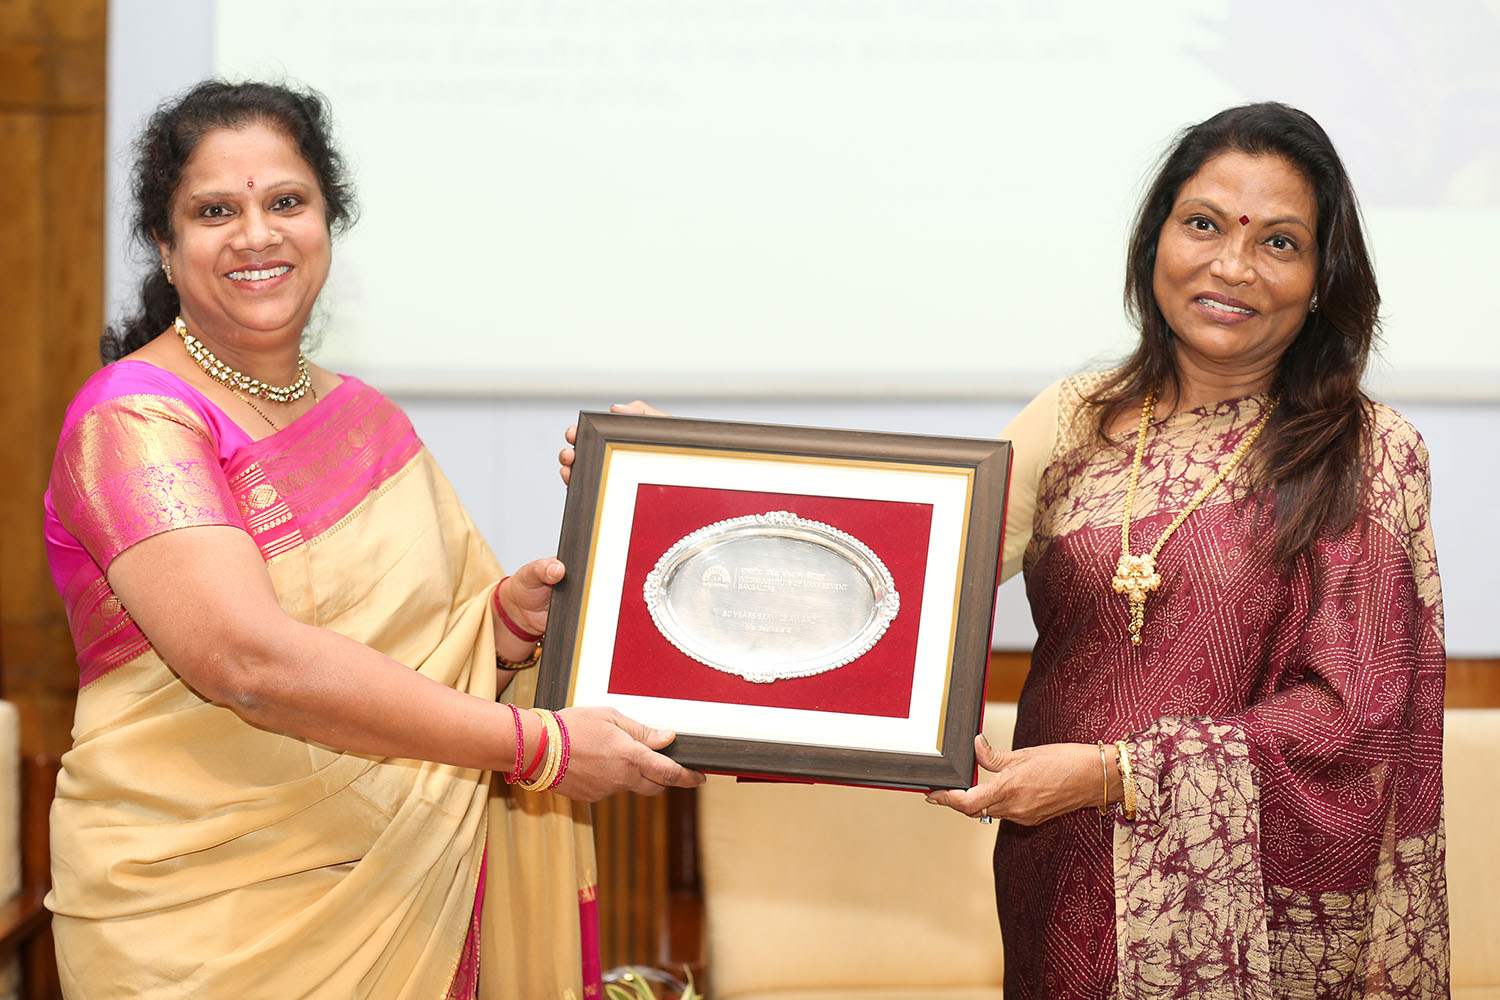 Ms Sesikala G, Senior Executive, Centre for Public Policy, receives the award for 30 years of service from Ms. Kalpana Saroj, Member of the Board of Governors, IIMB, during the institute’s 49th Foundation Day celebrations.